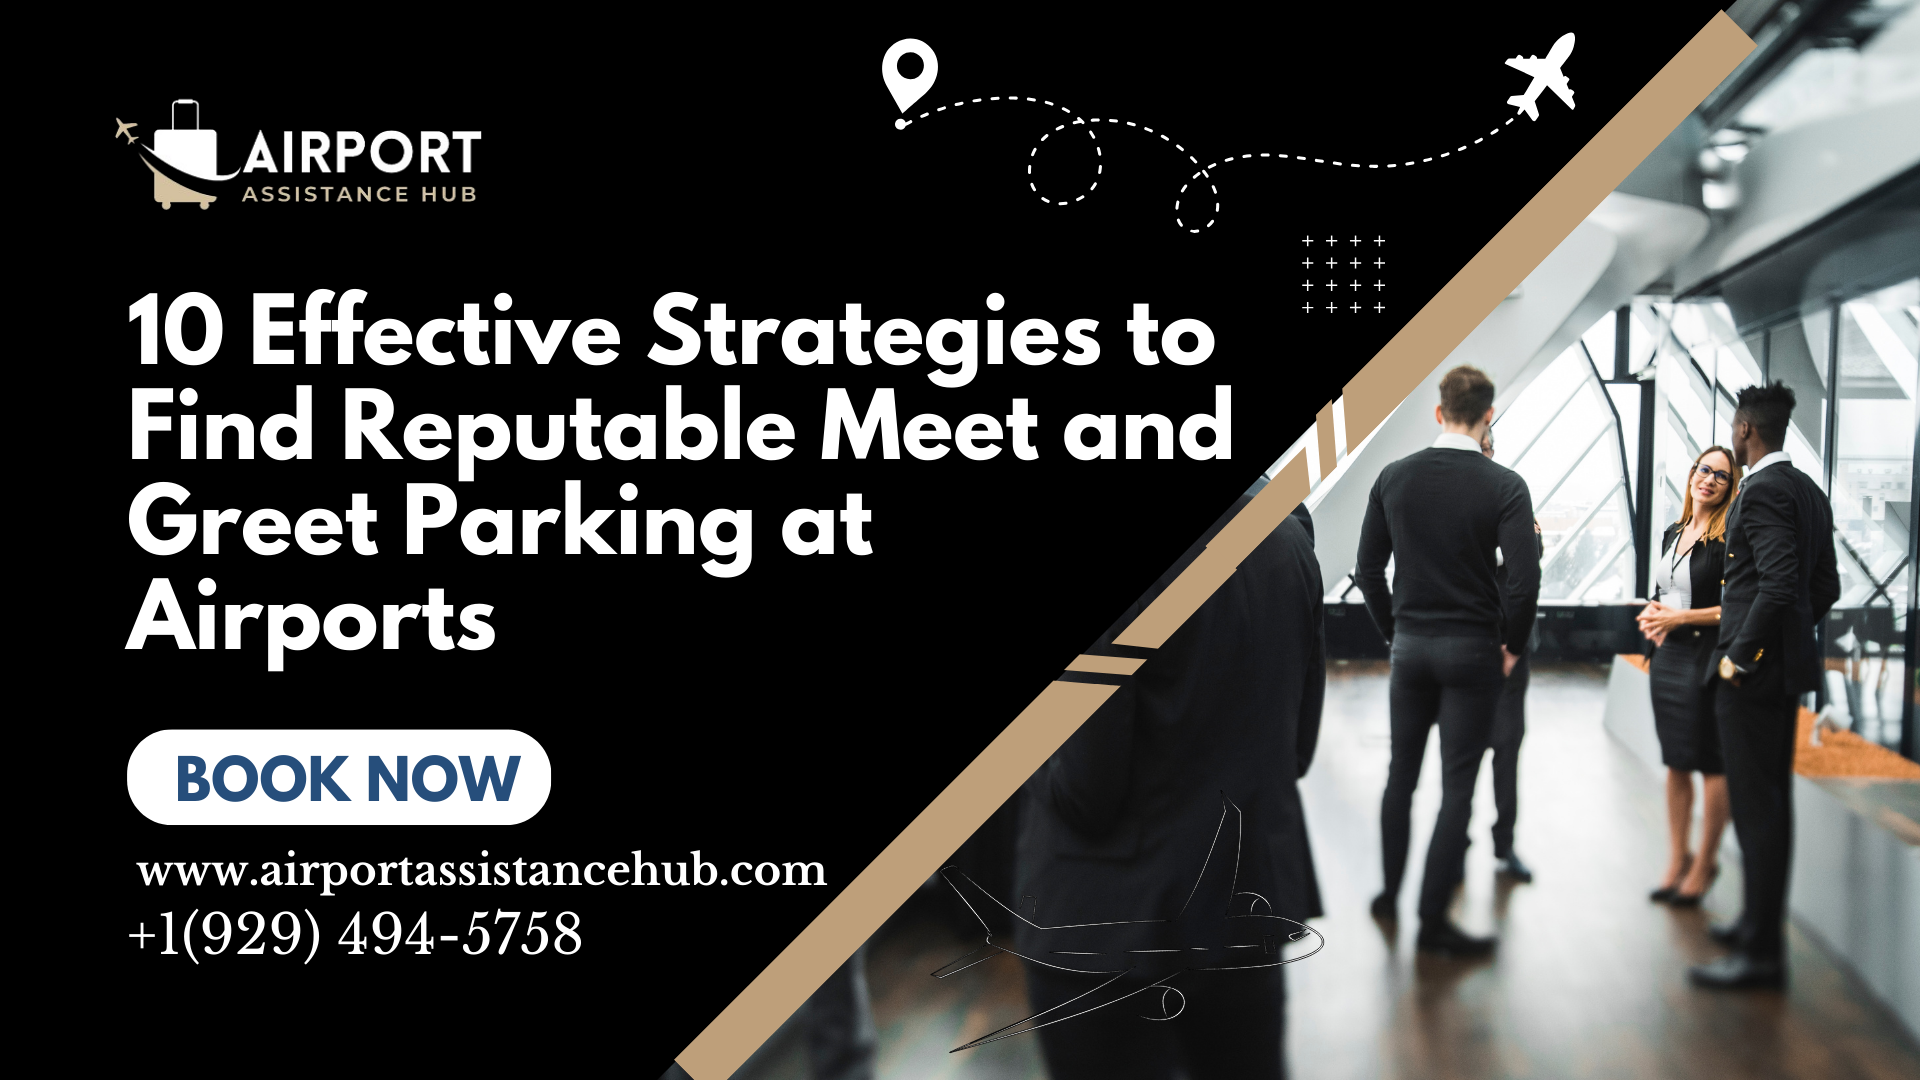 10 Effective Strategies to Find Reputable Parking at Airport Meet and Greet